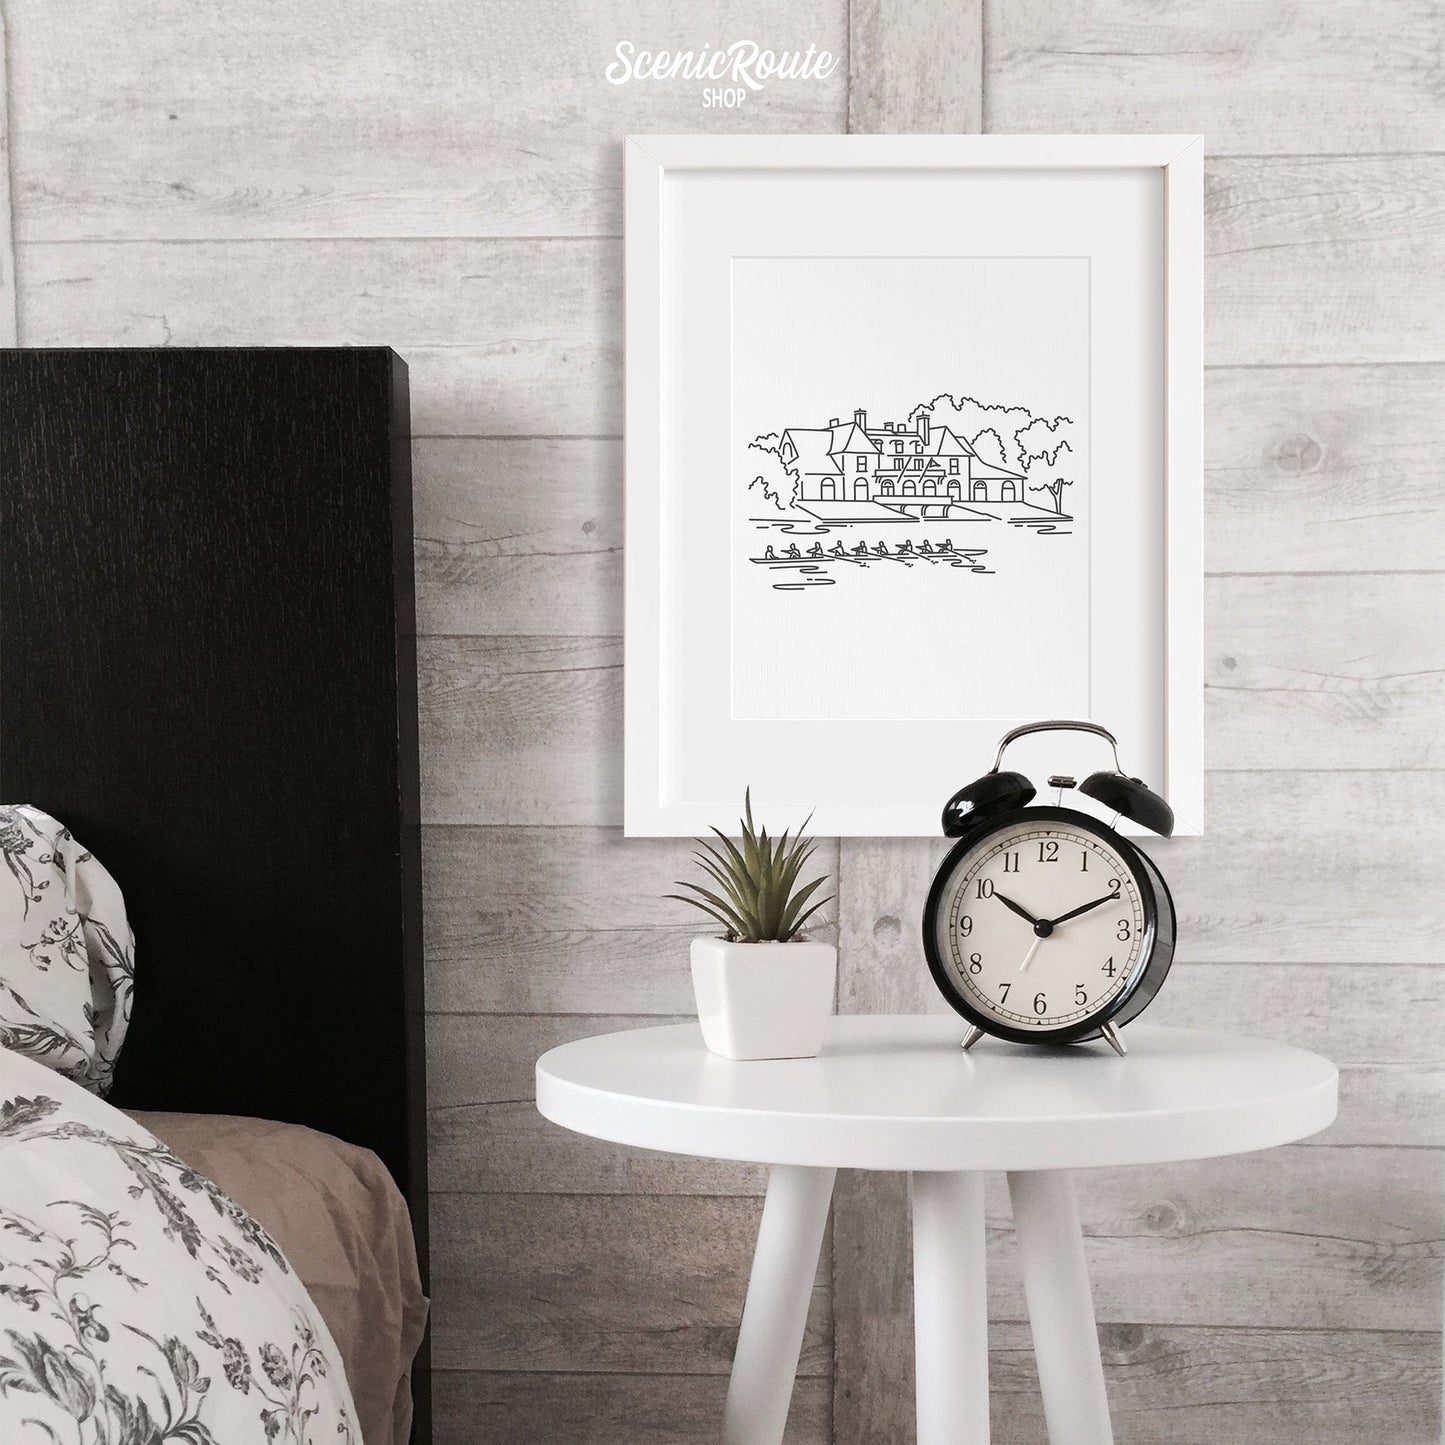 A framed line art drawing of the Harvard Boathouse above a nightstand next to a bed